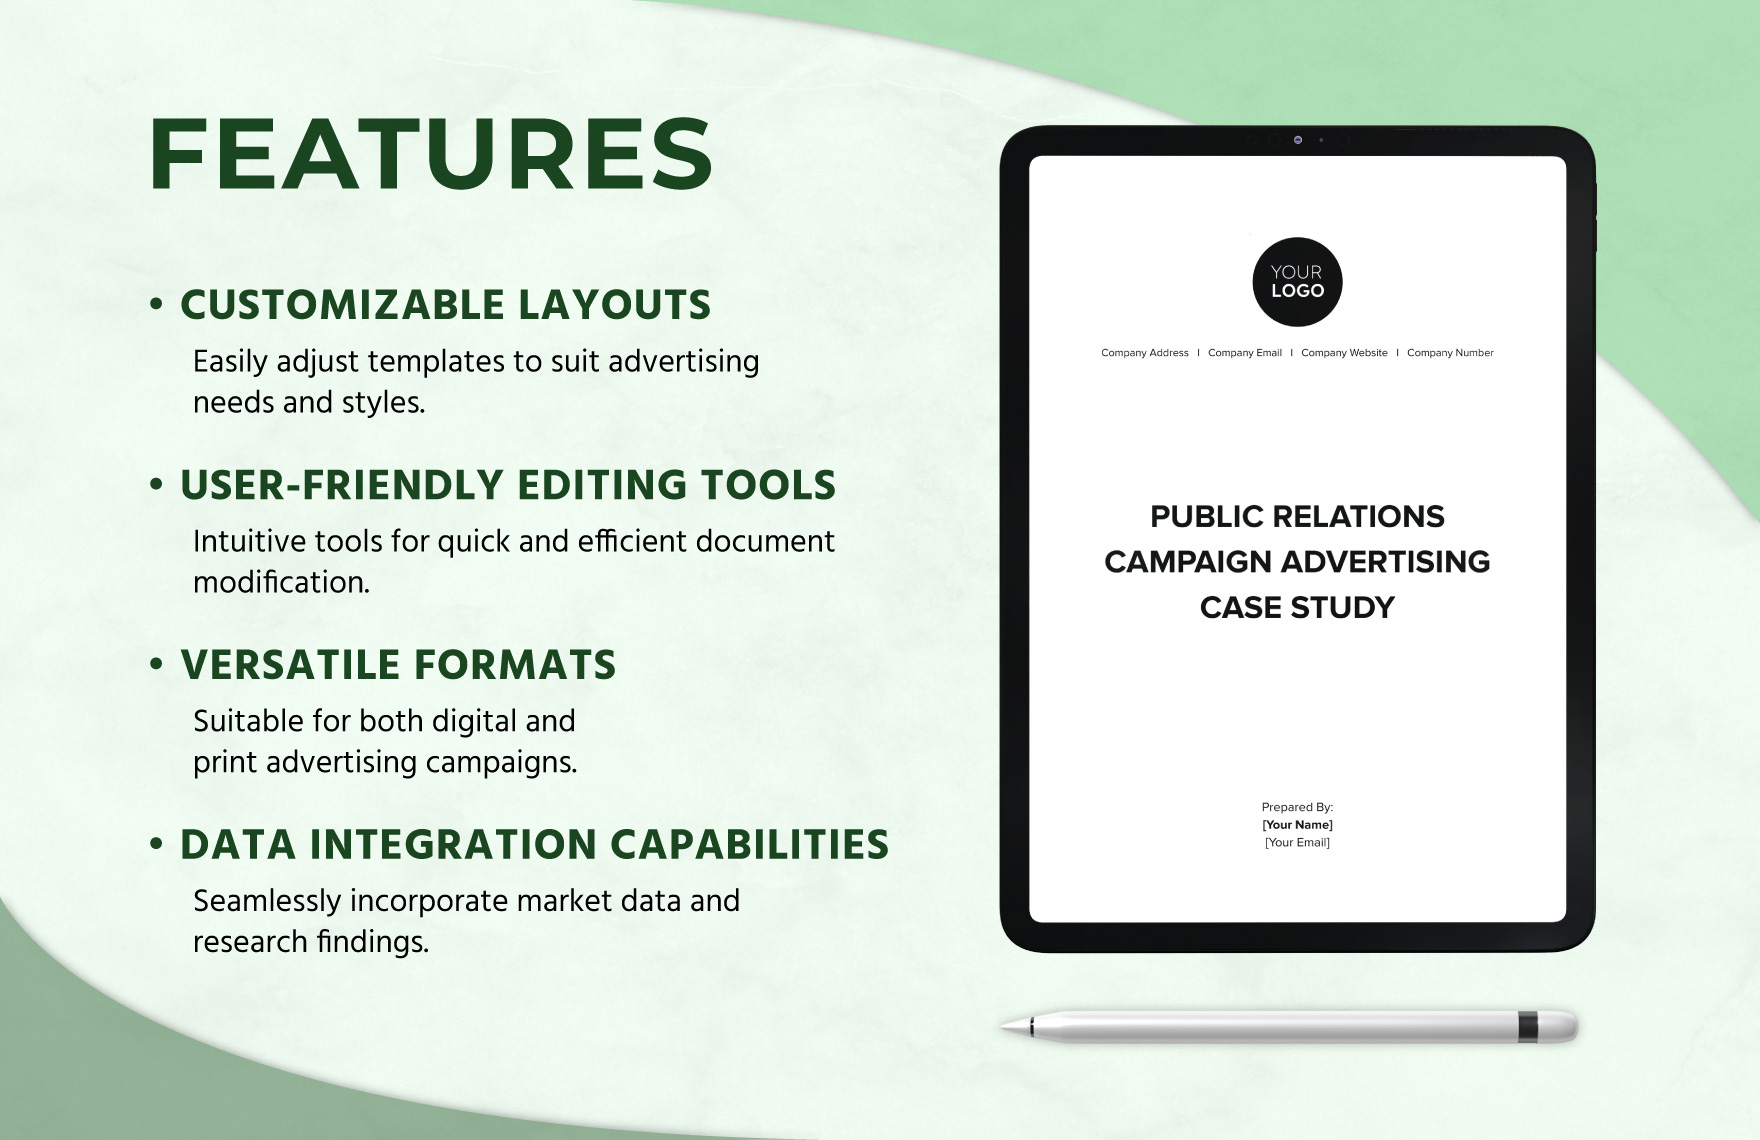 Public Relations Campaign Advertising Case Study Template